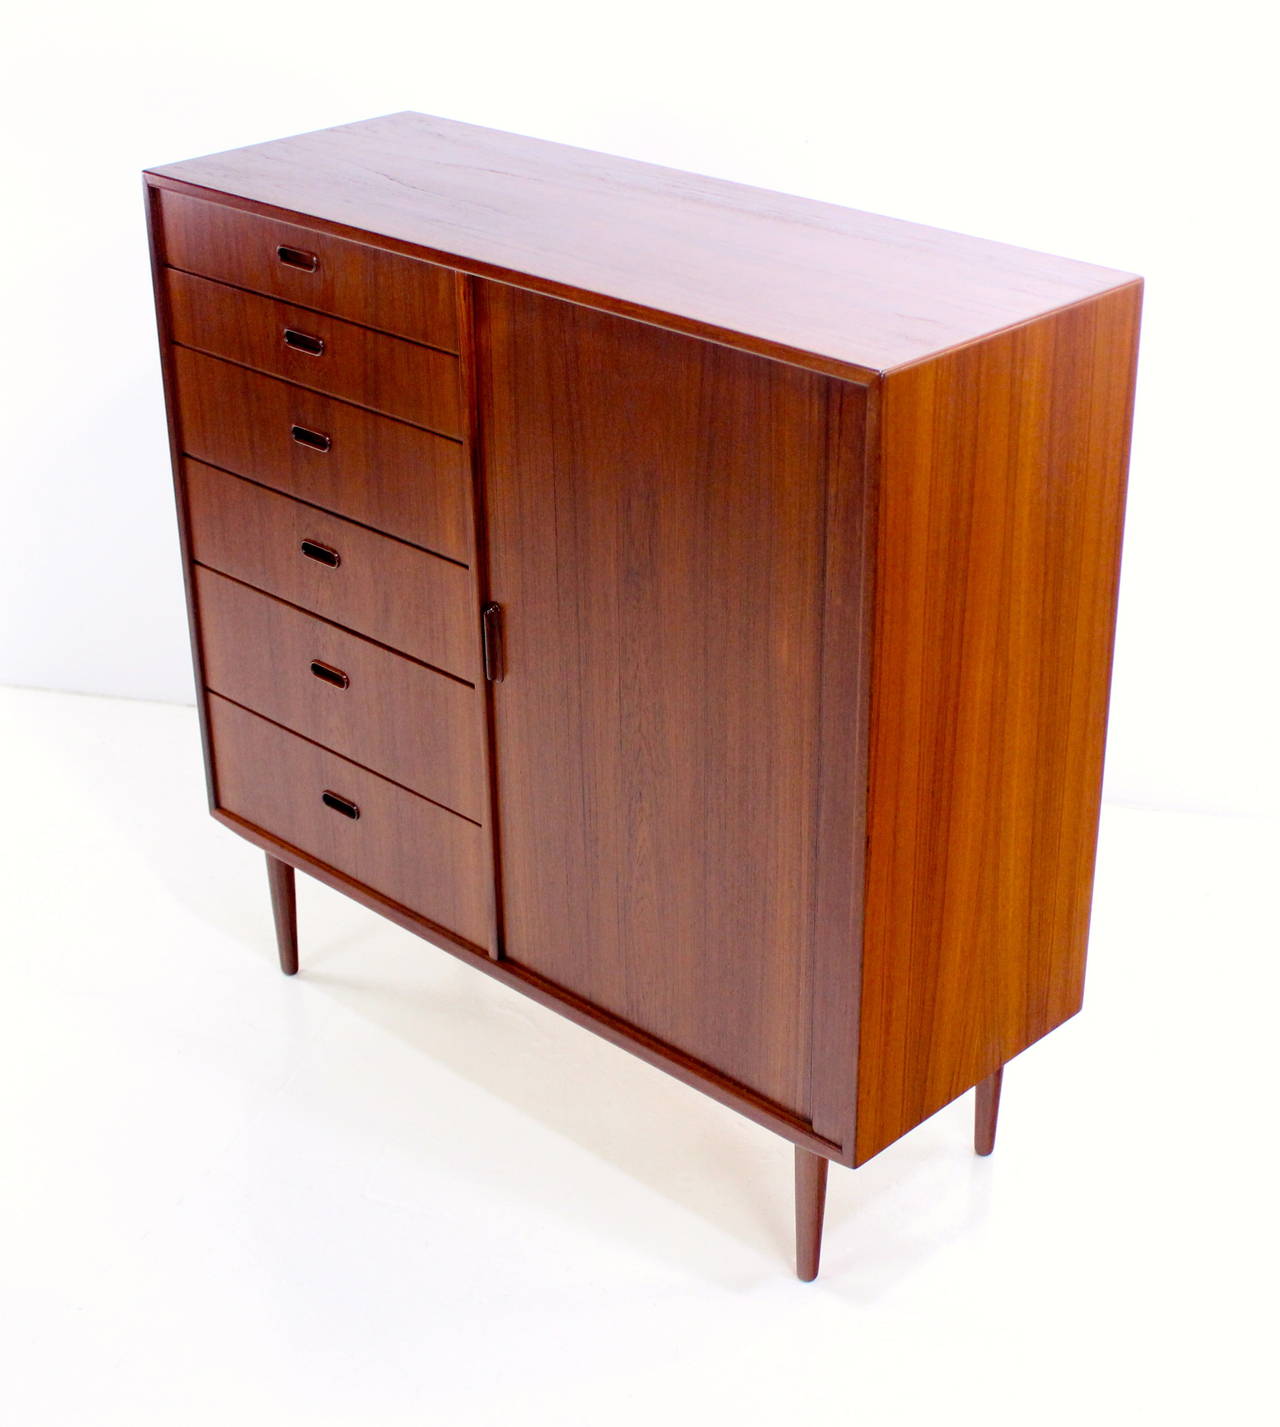 Danish modern gentleman's chest designed by Ib Kofod-Larsen.
Richly grained teak with birch interior.
Beautifully crafted tambour door on right glides open to six pull-out trays.
Six drawers on the left.
Spacious storage for the most discerning